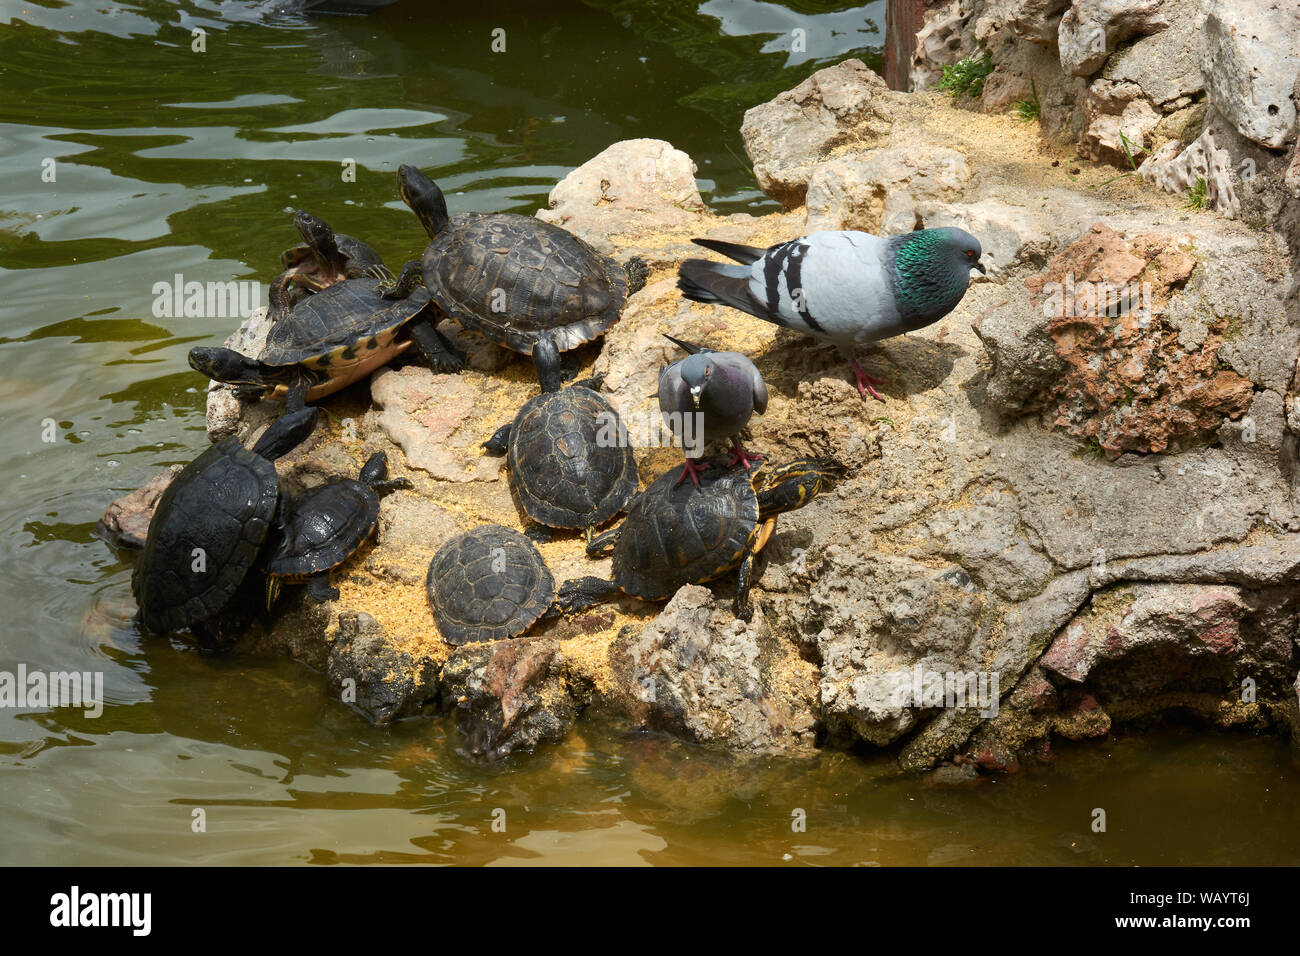 MADRID, SPAIN - APRIL 23, 2018: Aquatic turtles and pigeons next to an artificial pond in the Retiro Park, Madrid, Spain. Stock Photo